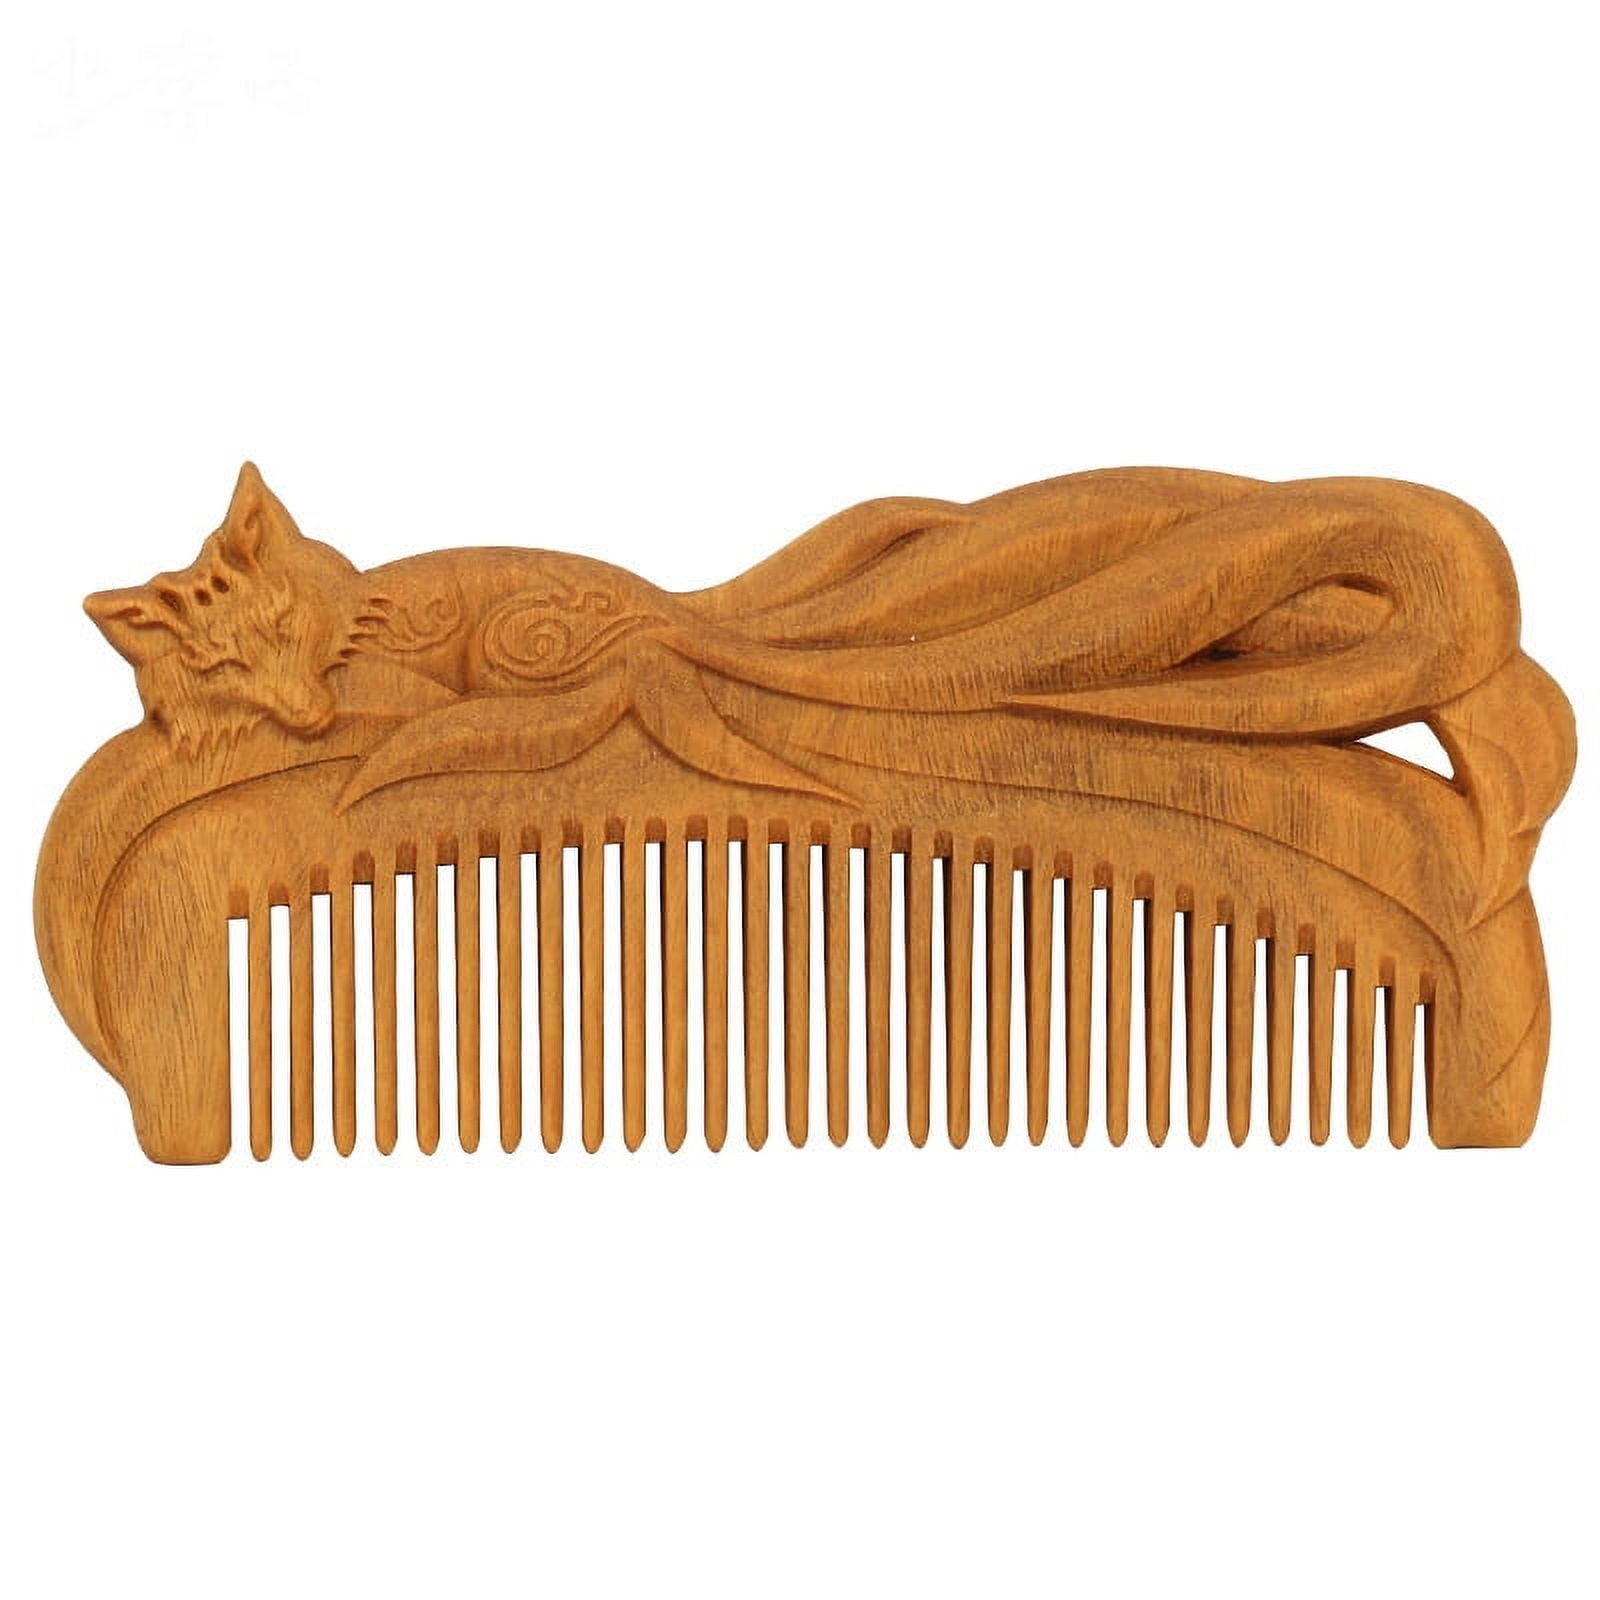 Handwork Portable Cute Carved Wooden Comb Home Decoration Accessories Women  Gift